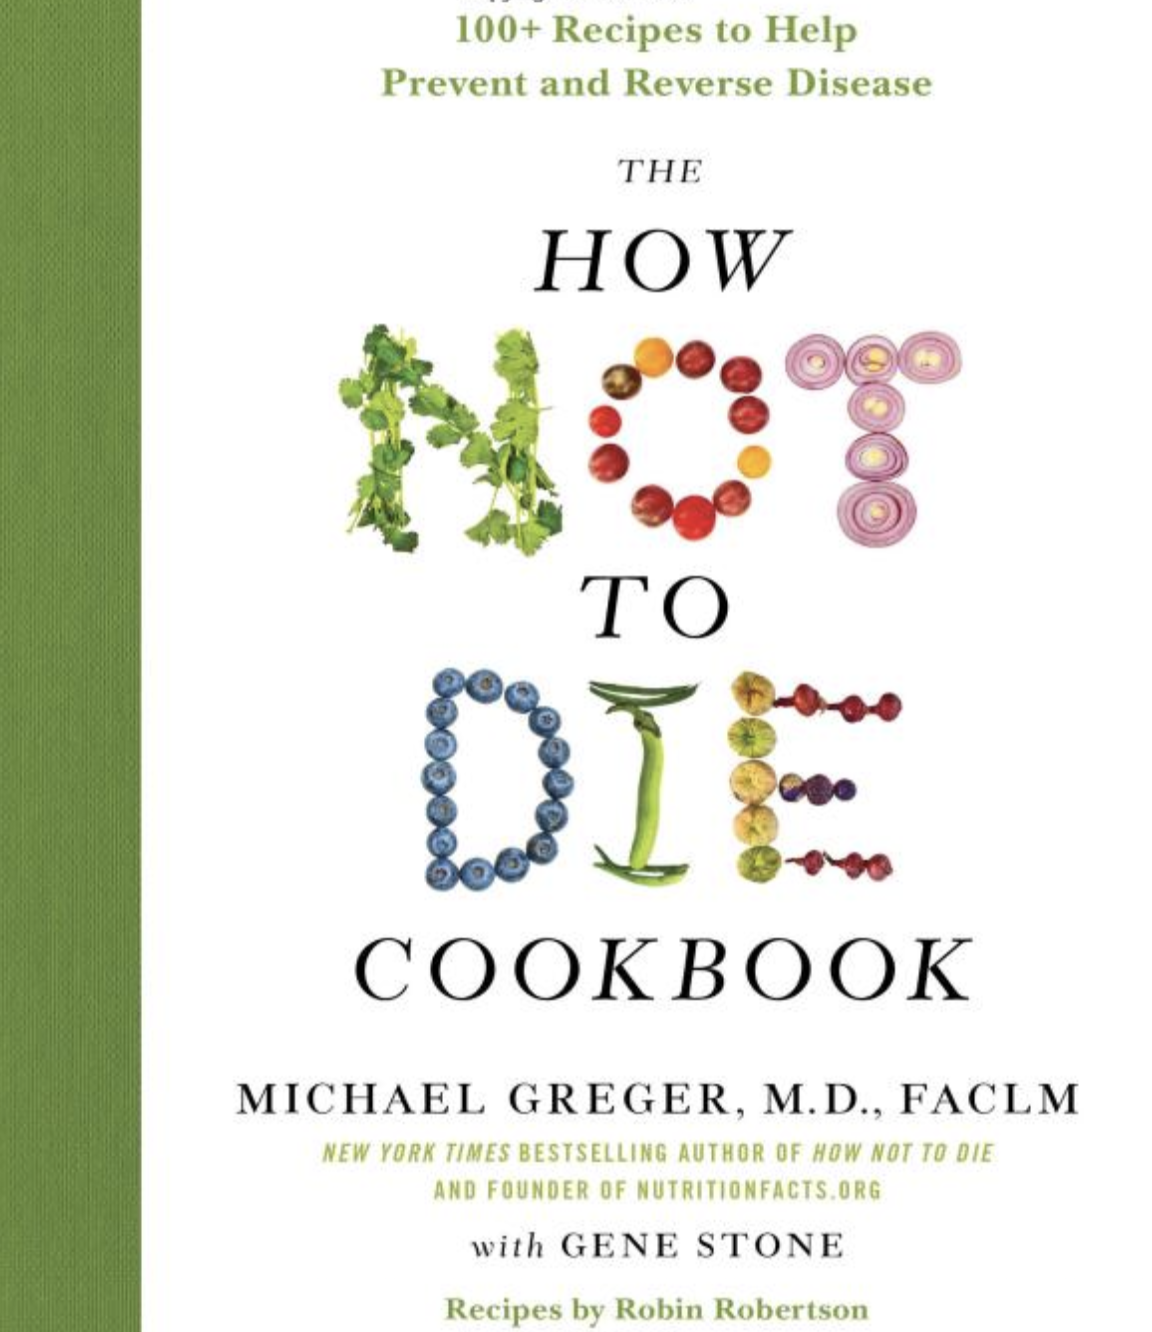 How Not to Die Cookbook | Wholesome LLC